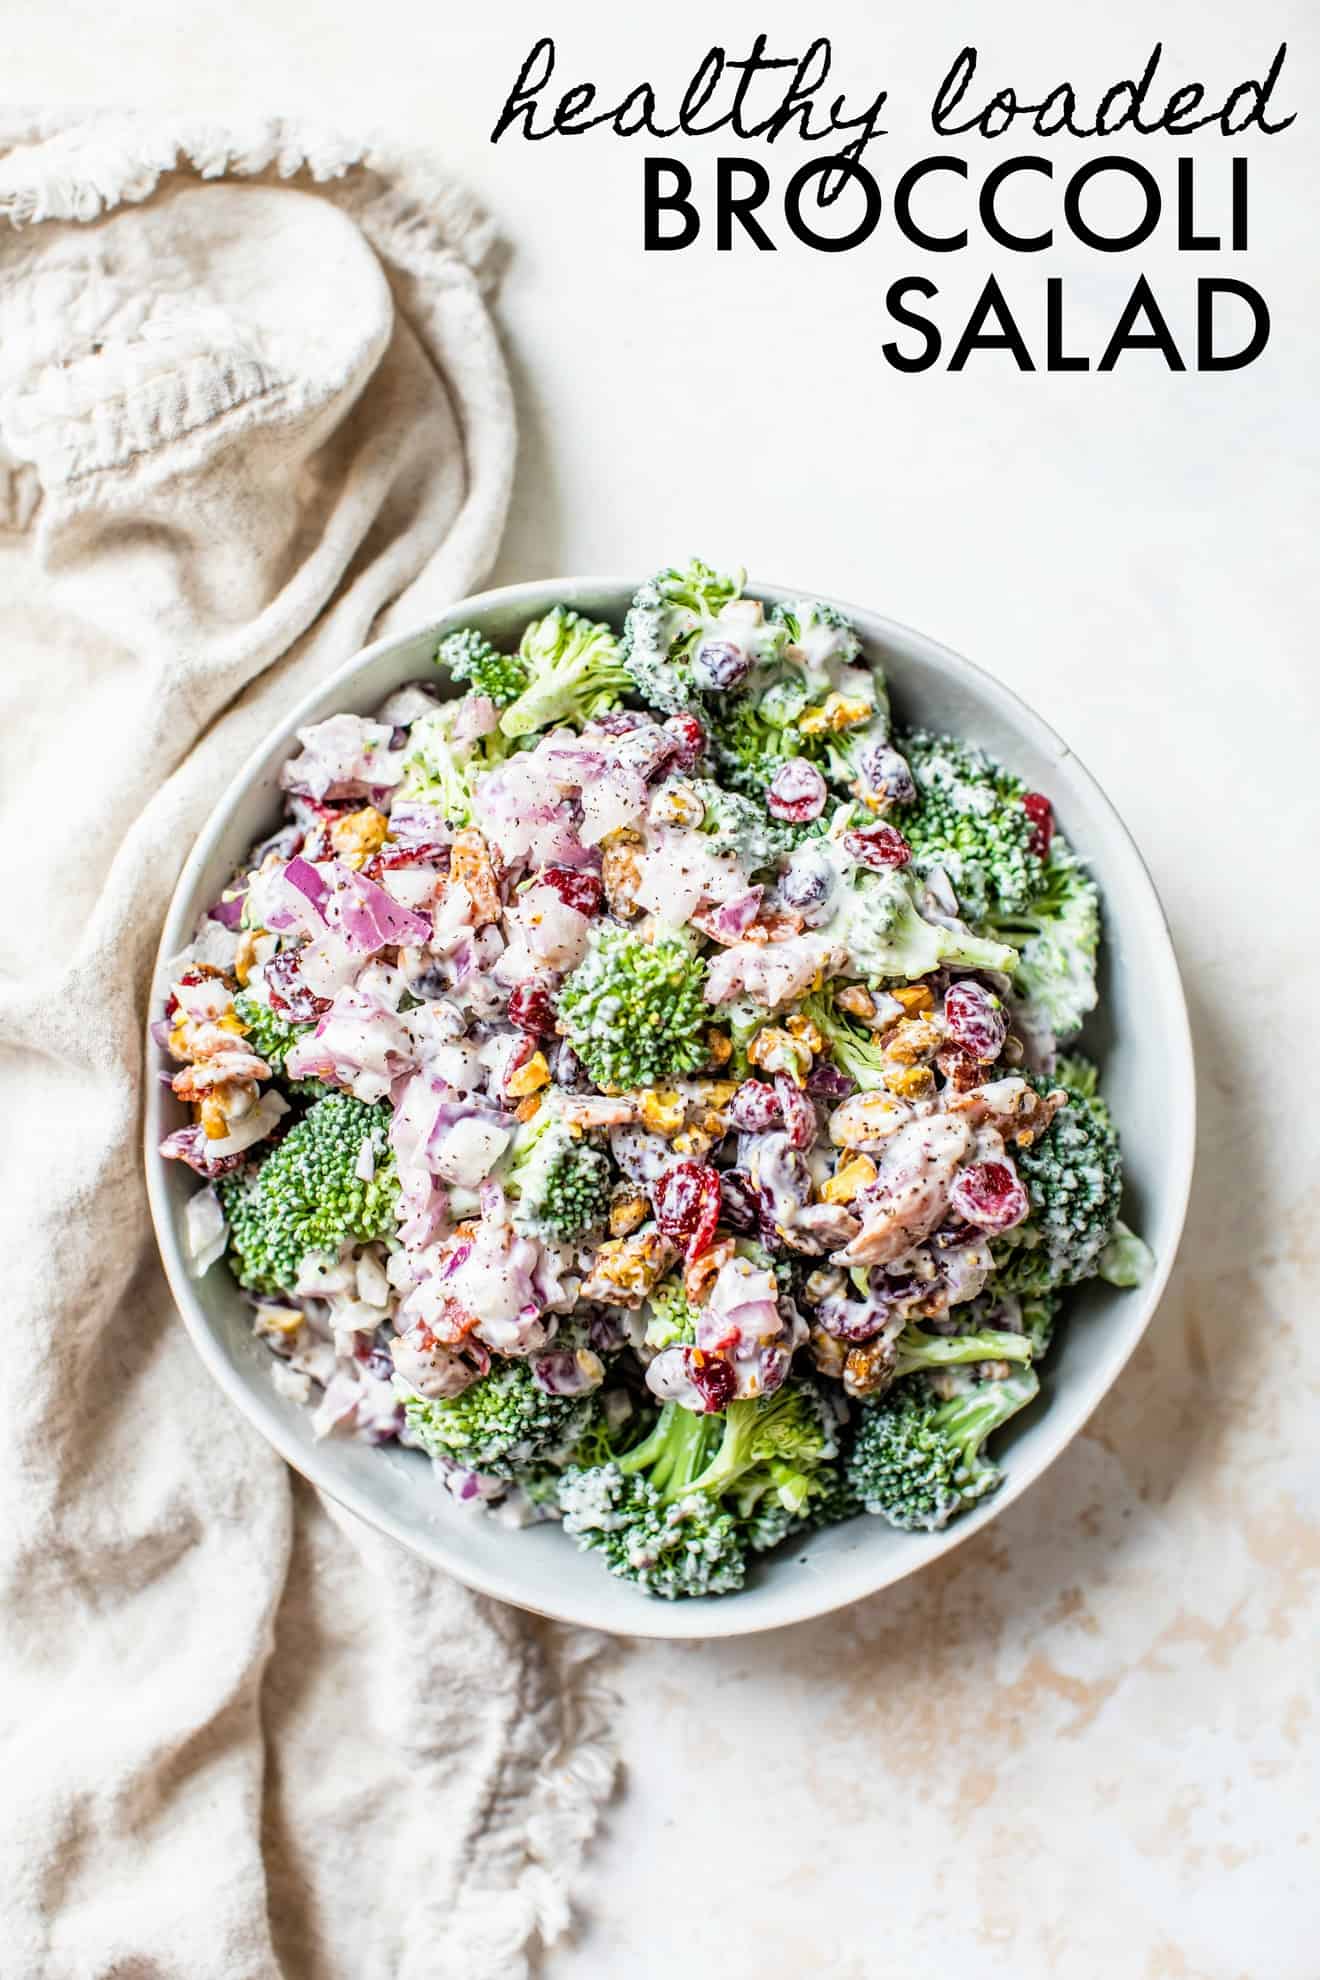 This simple 10 minute Healthy Broccoli Salad is so easy to whip together for your summer barbecue or potluck and is loaded with flavor!! thetoastedpinenut.com #thetoastedpinenut #healthy #broccoli #salad #summer #easy #recipe #glutenfree #sidedish